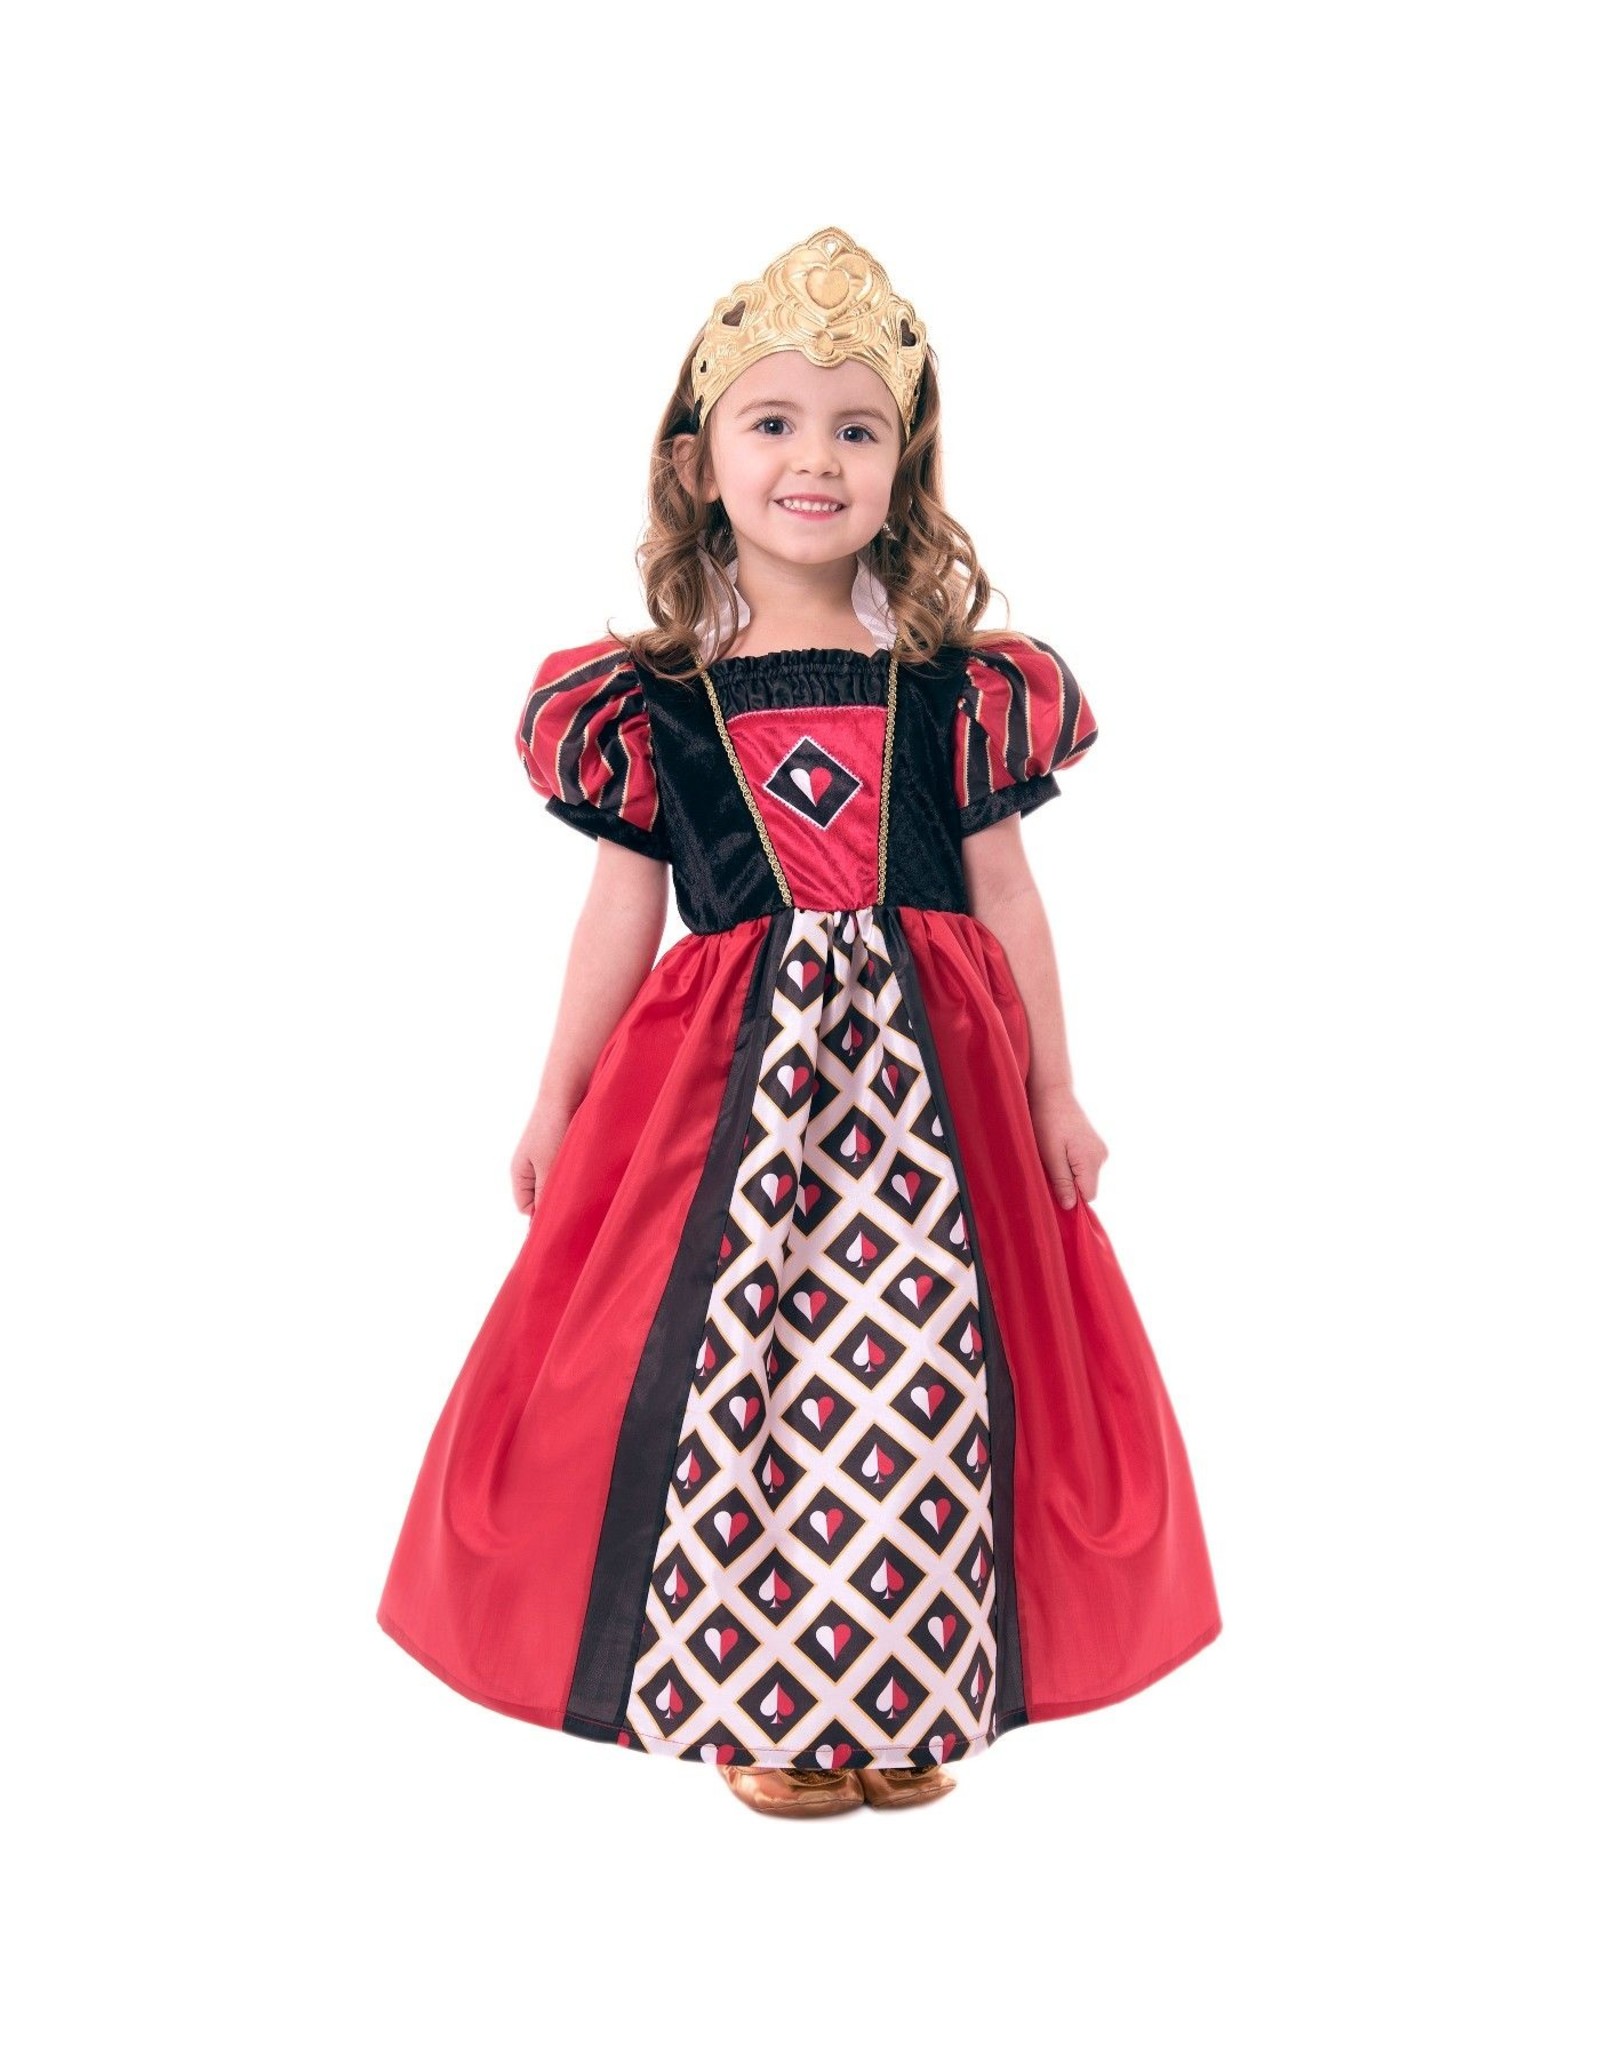 Queen of Hearts with Soft Crown